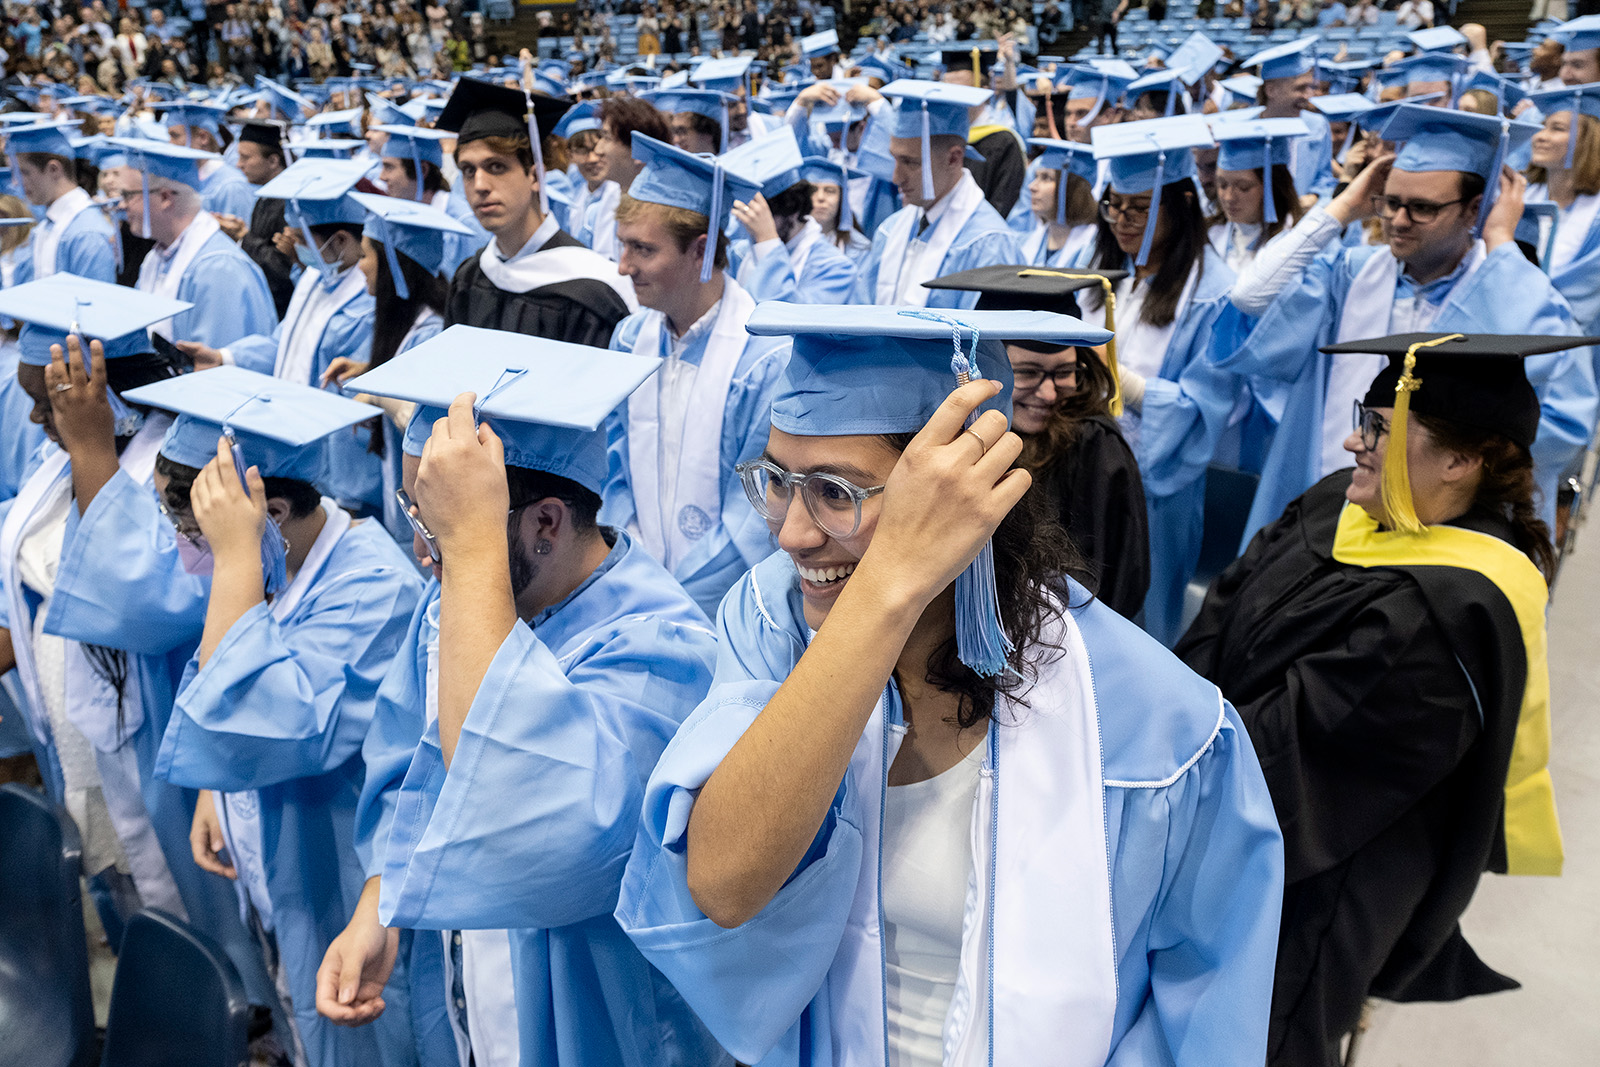 Students turning their tassels.